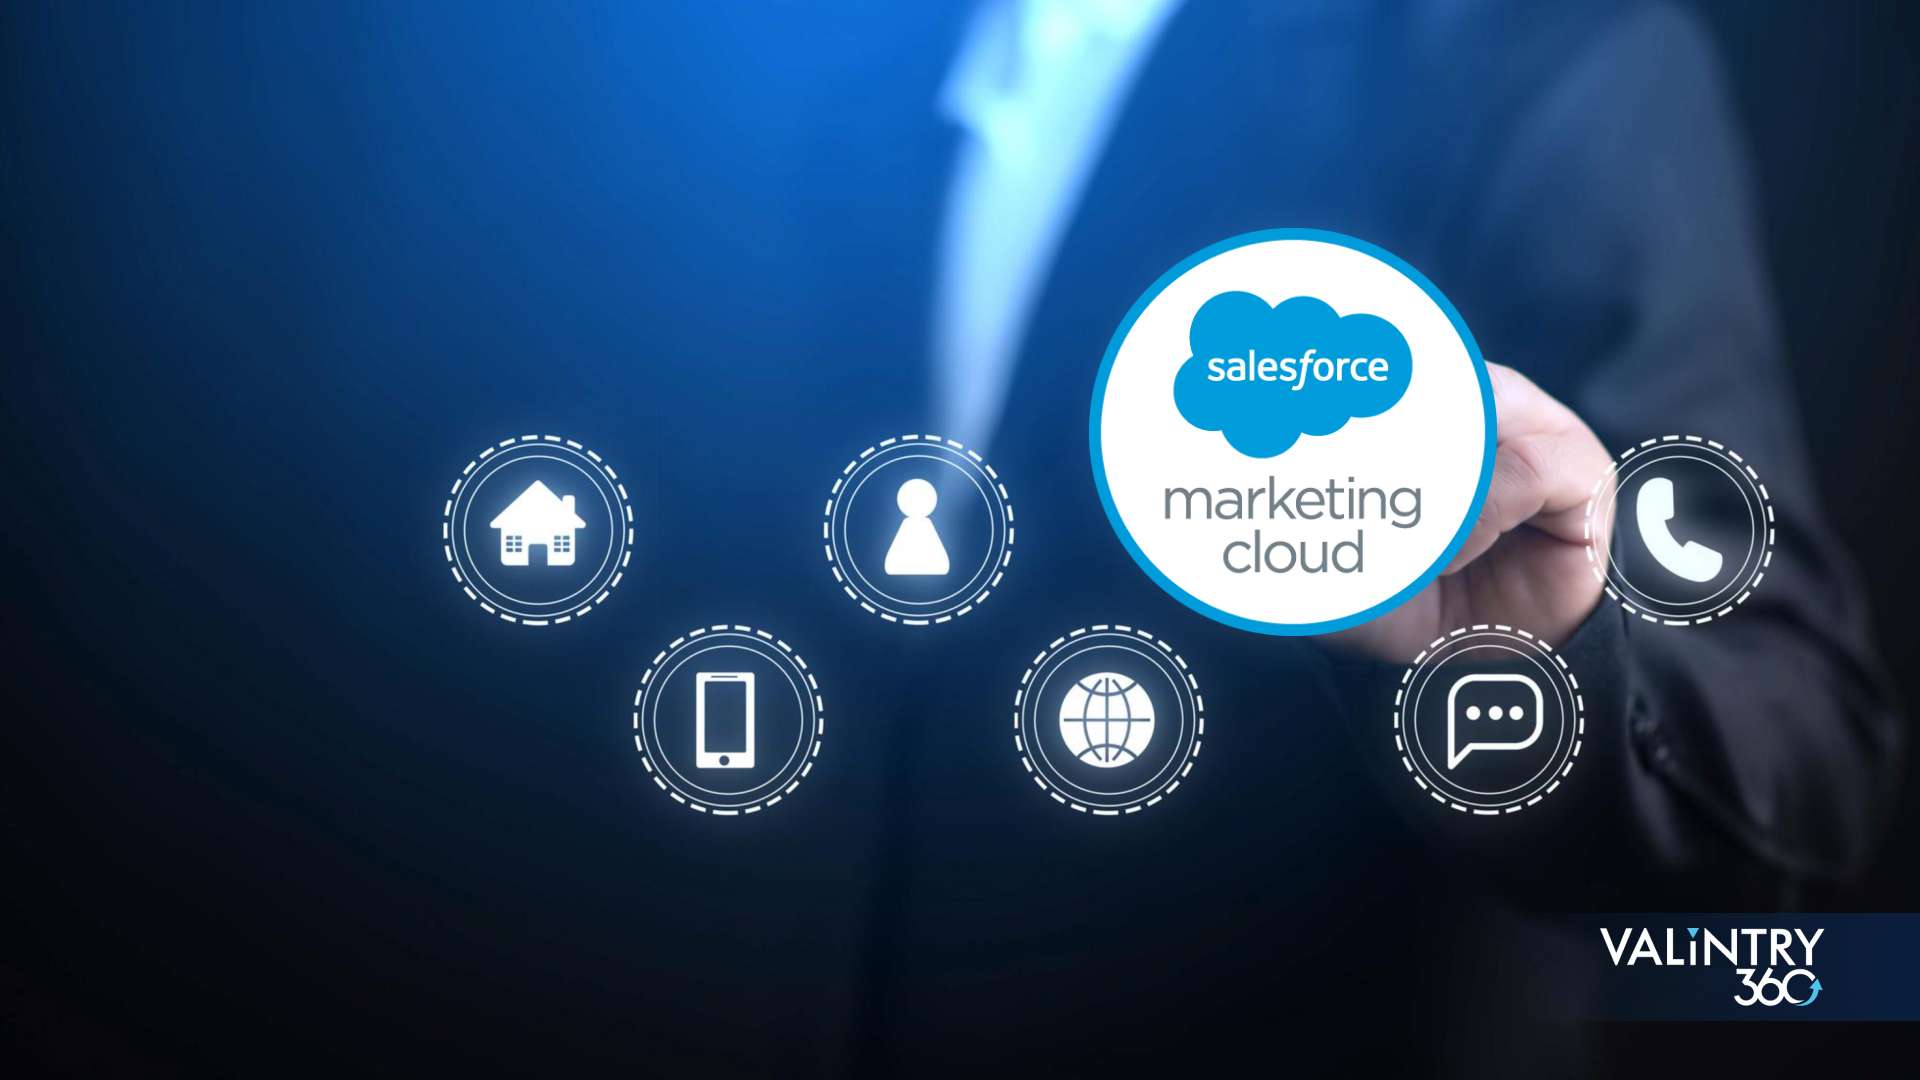 Key features and functionalities of Salesforce Marketing Cloud